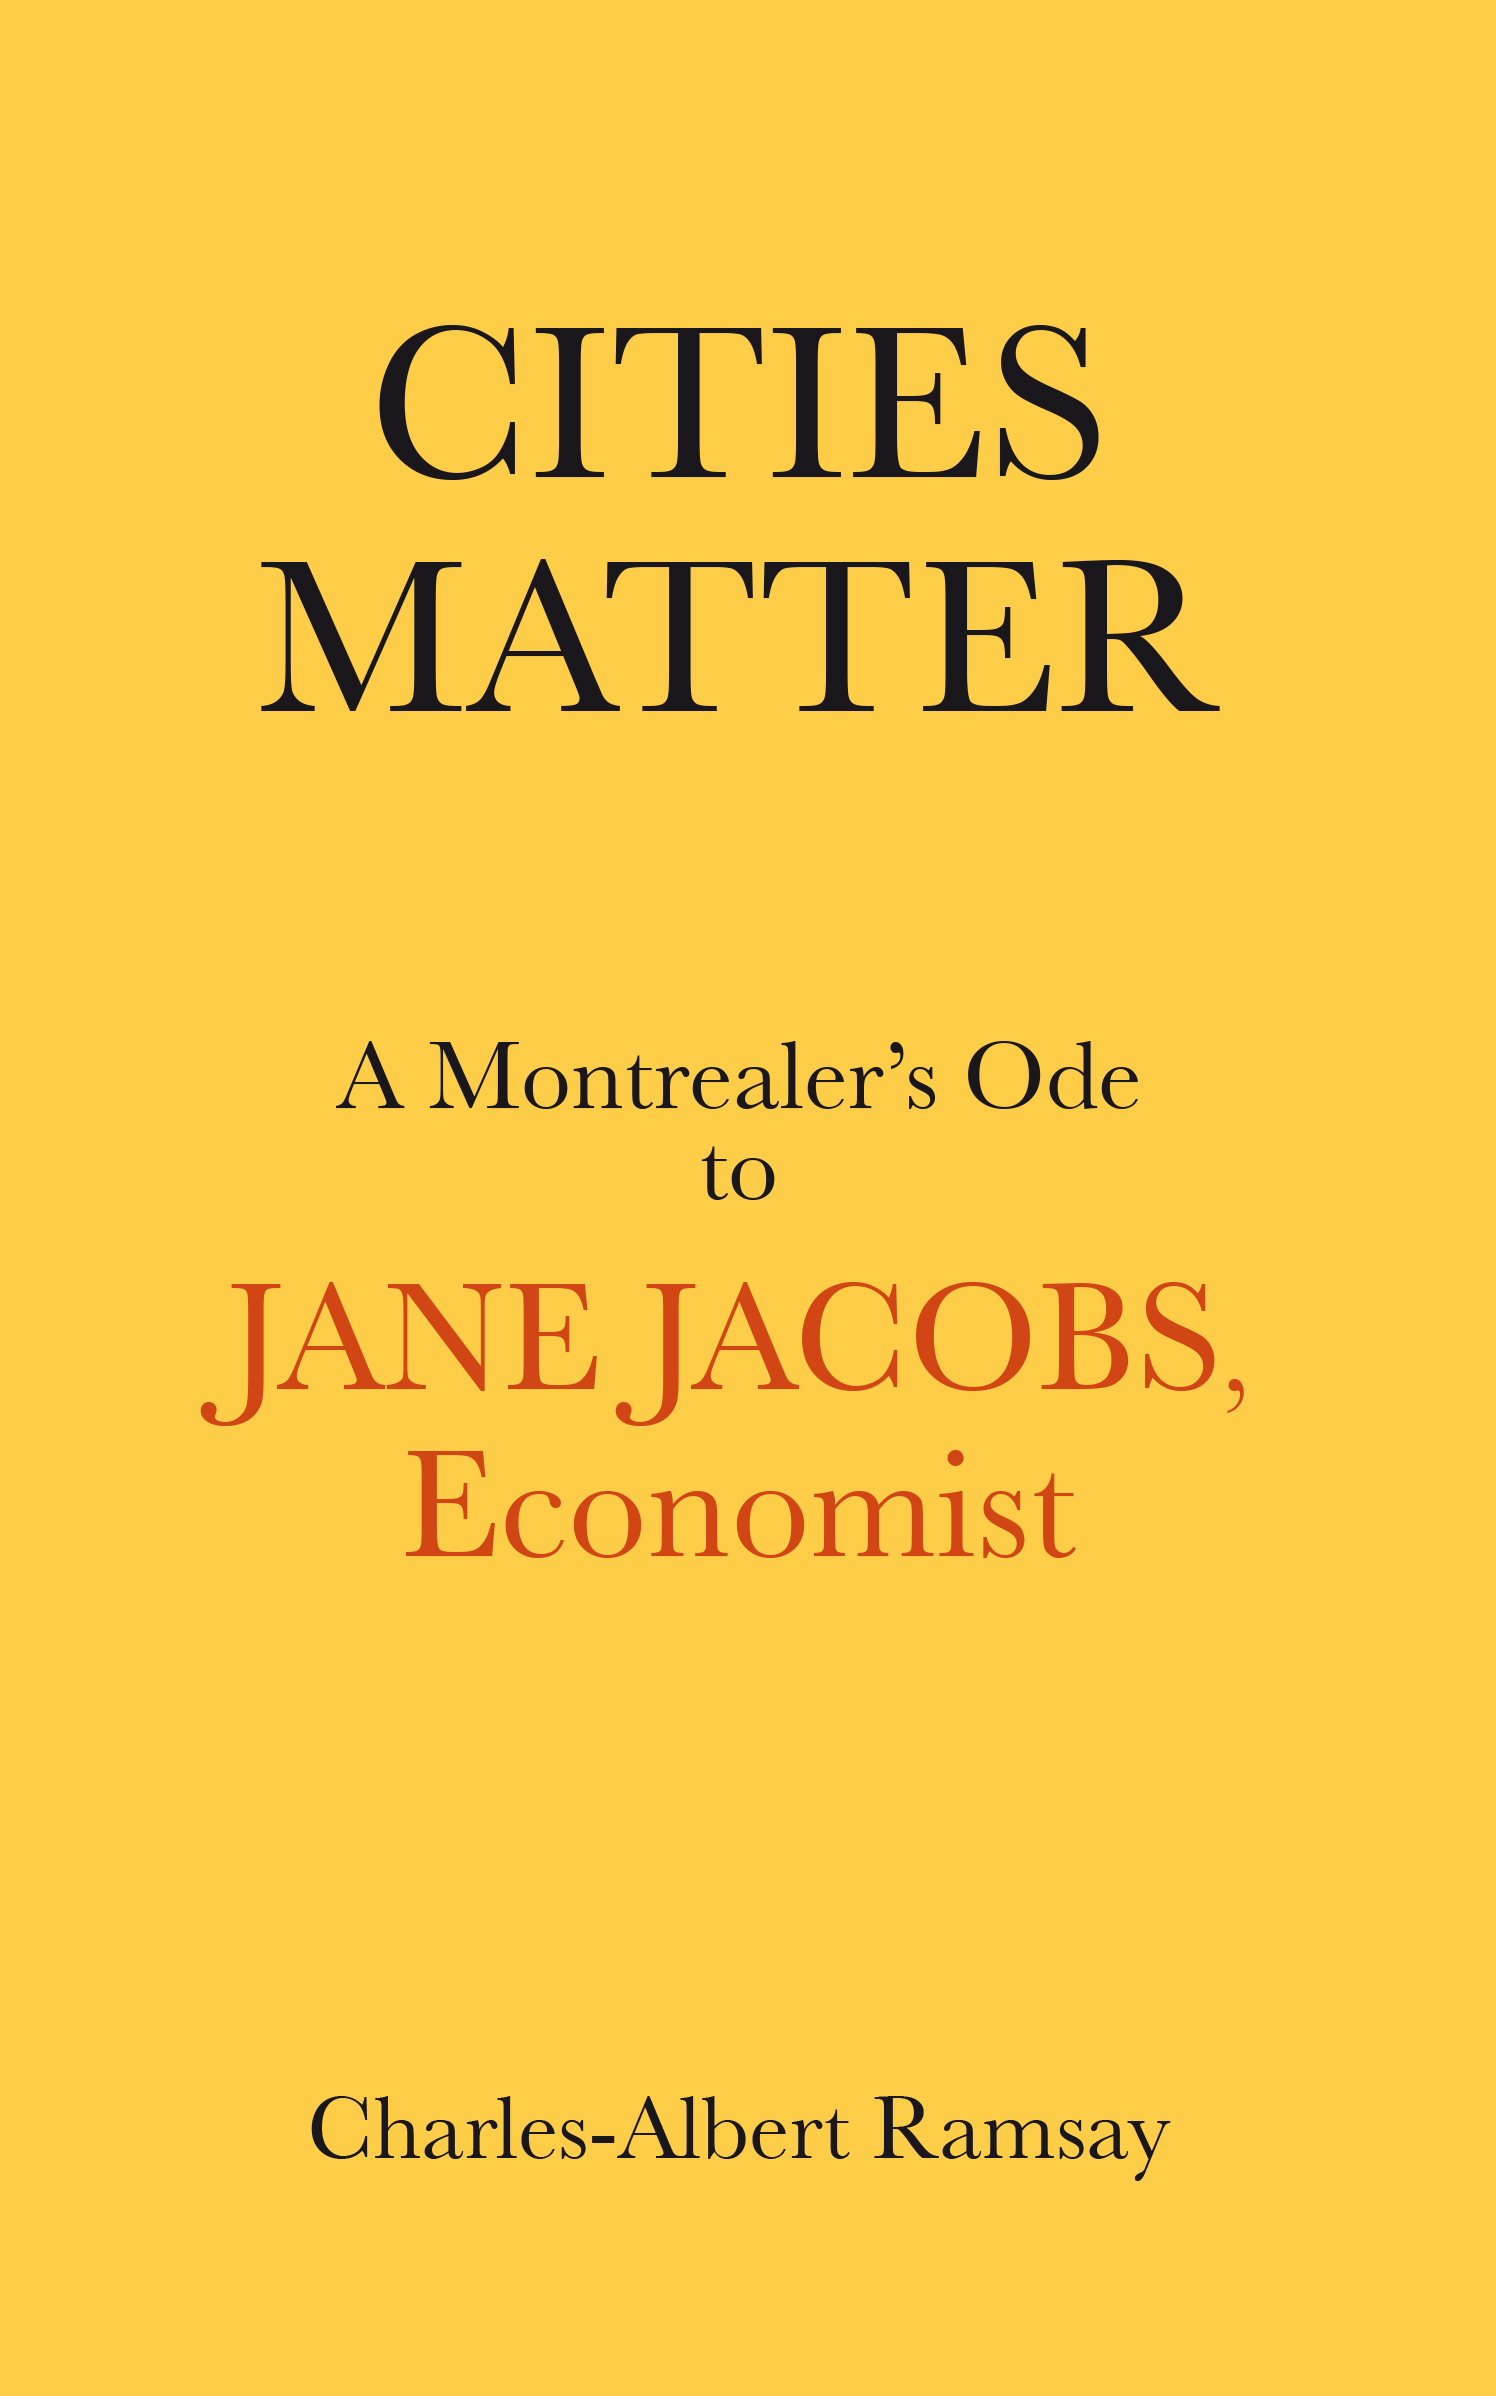 CITIES MATTER, A Montrealer’s Ode to Jane Jacobs, Economist